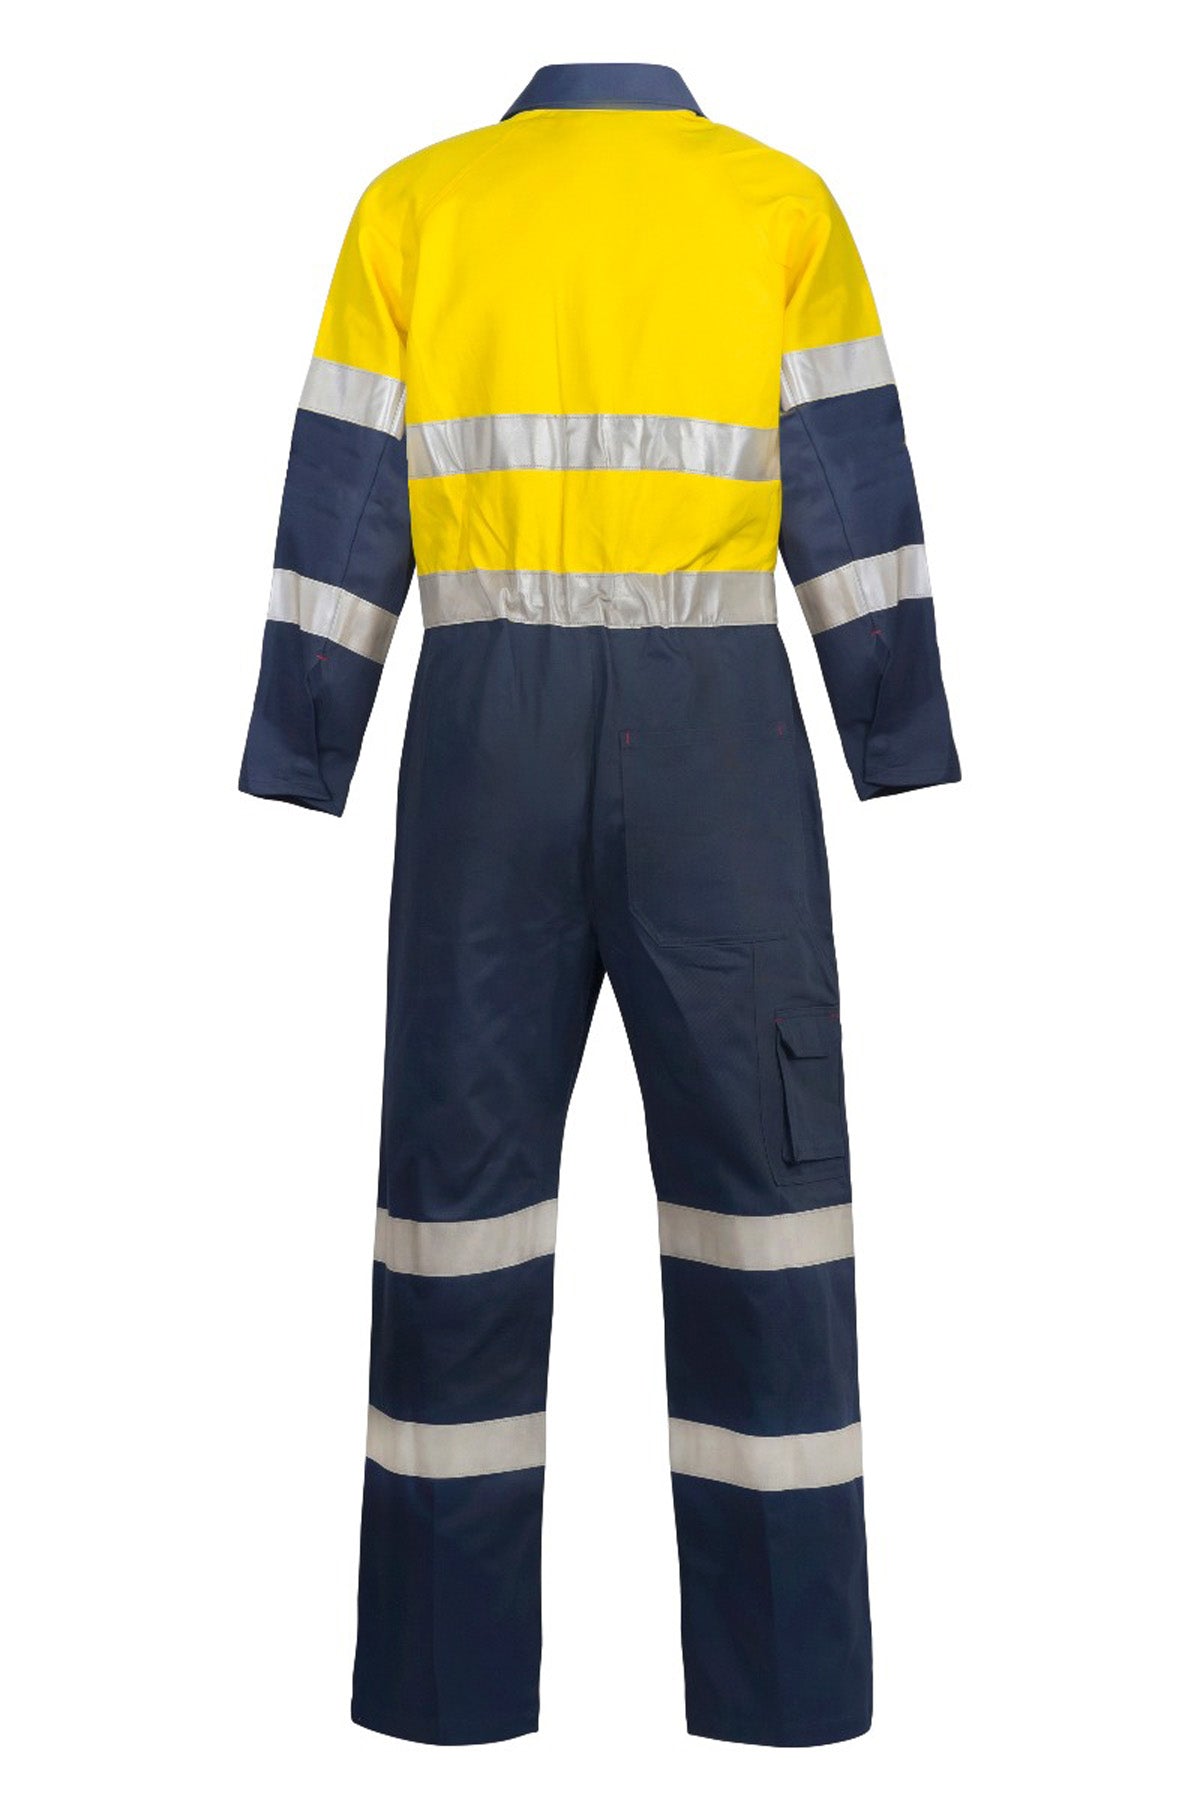 Day/Night Hi Vis Cotton Drill Coveralls With Industrial Wash Reflective Tape - made by Workcraft